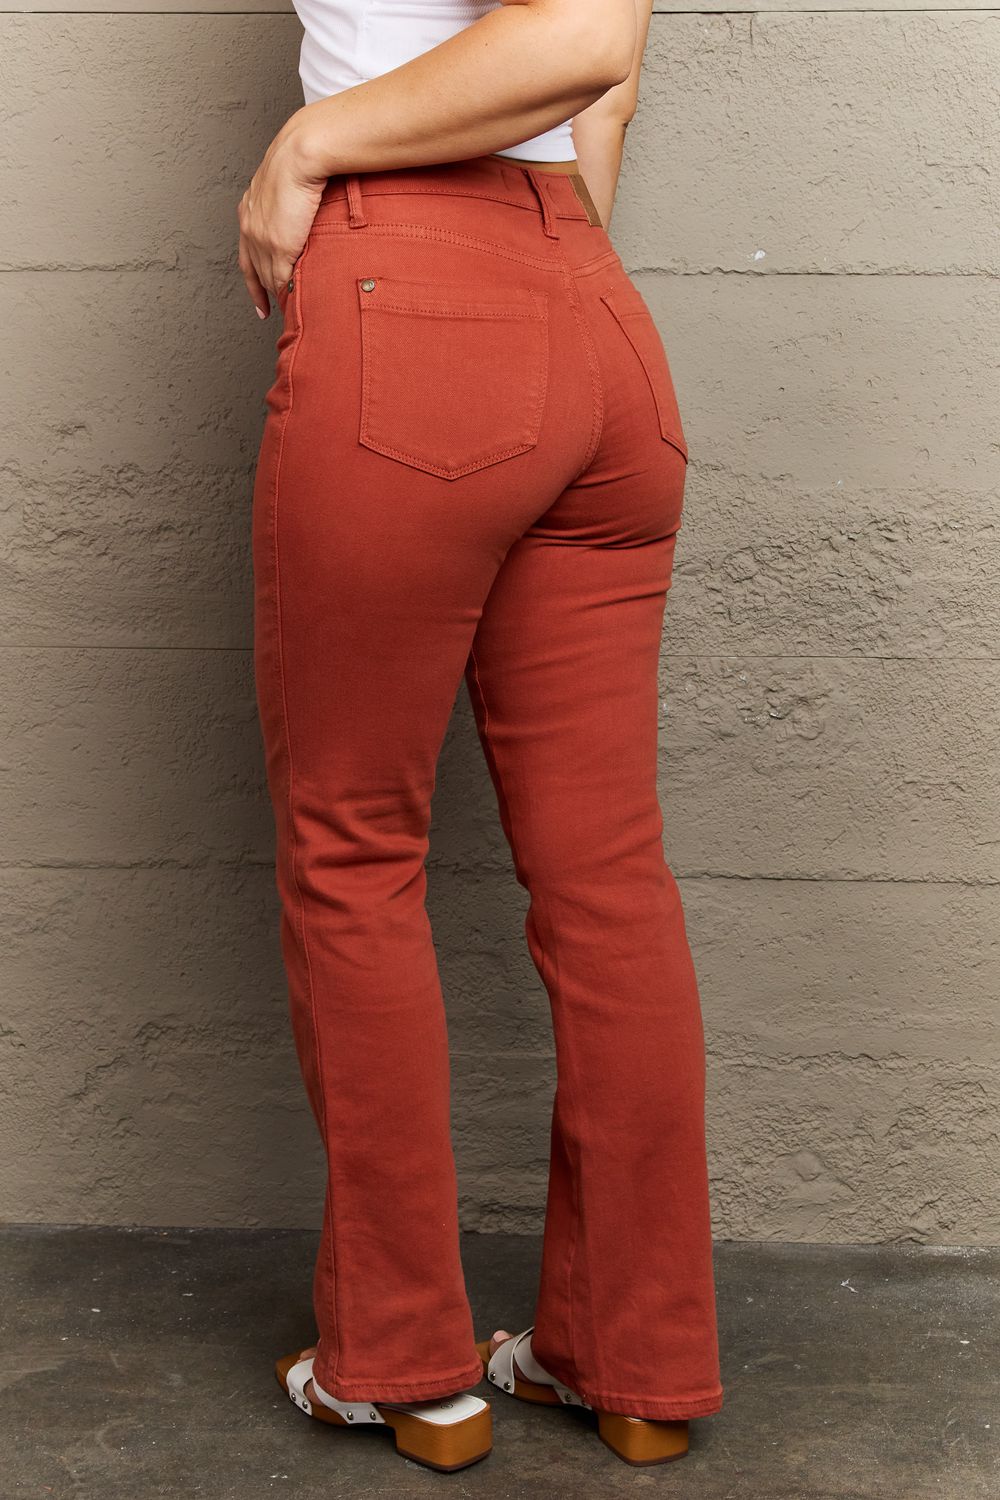 Back View, Judy Blue Mid Rise Slim Bootcut Terracotta Denim Jeans Style 88761